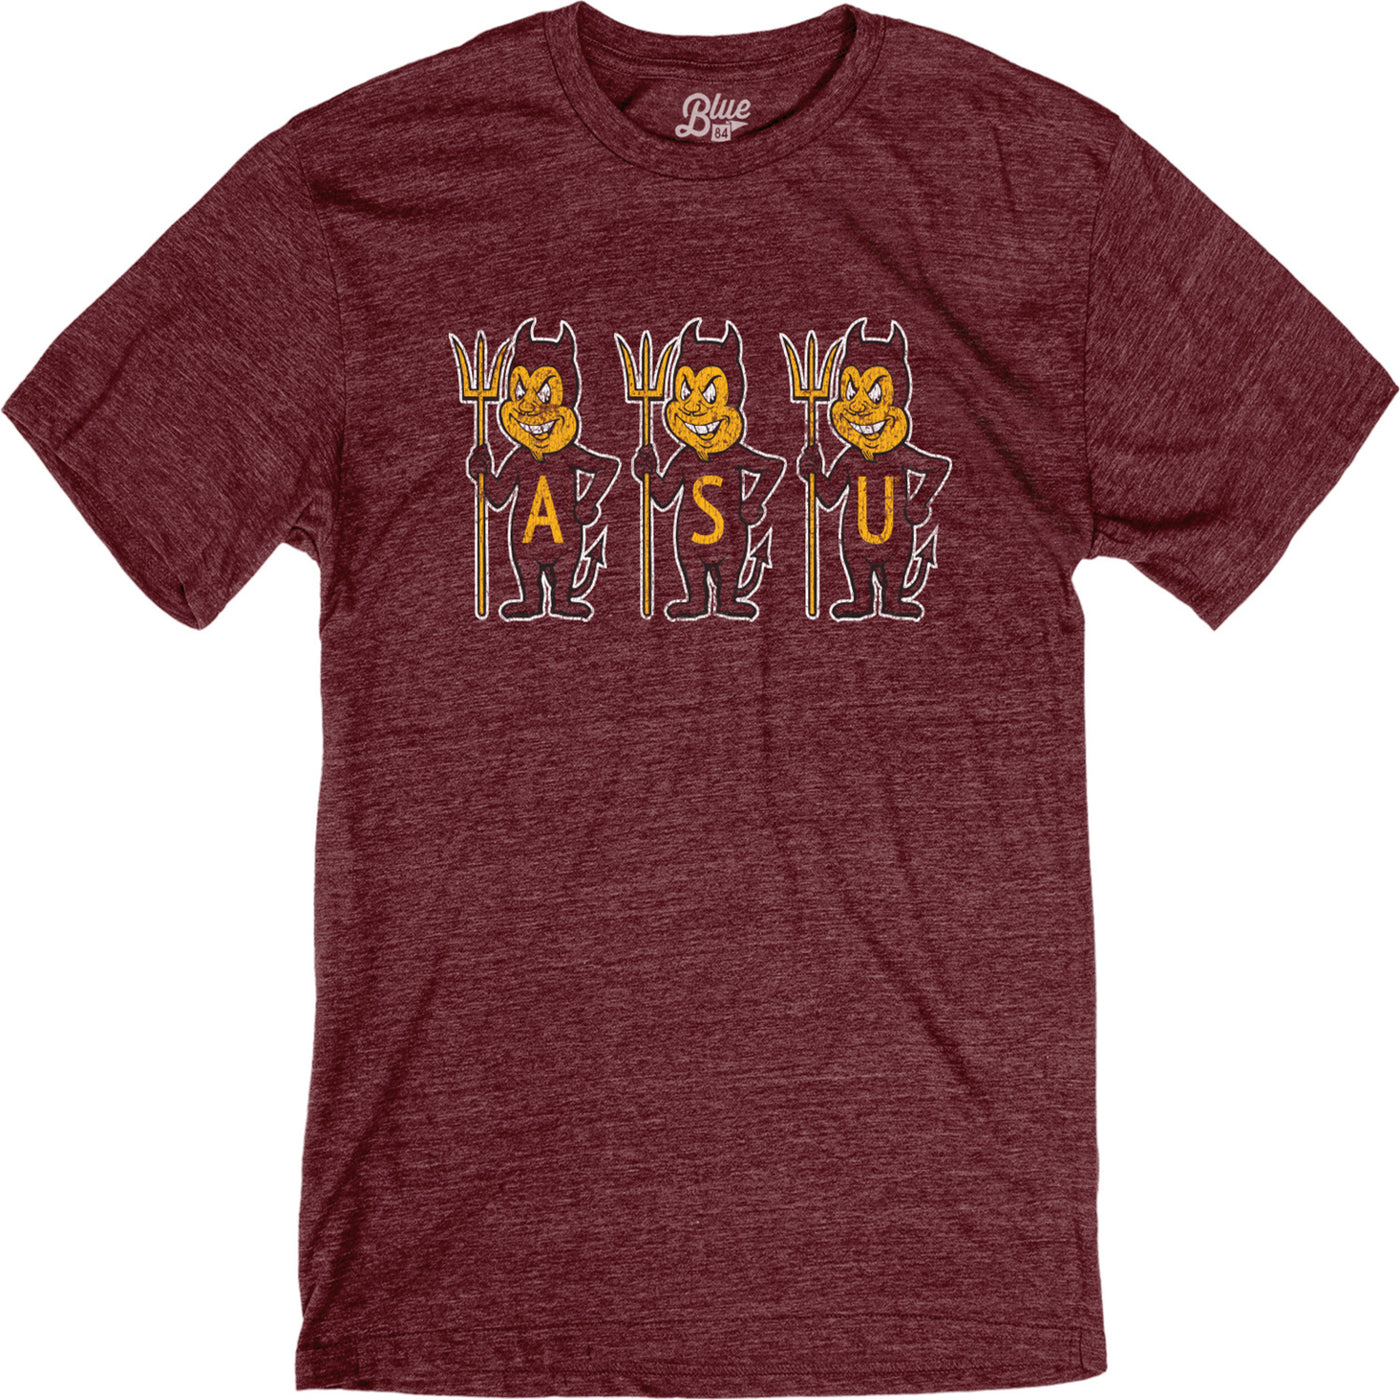 ASU maroon tee with 3 Sparkys standing next to each other with 'ASU' letters on their tummies